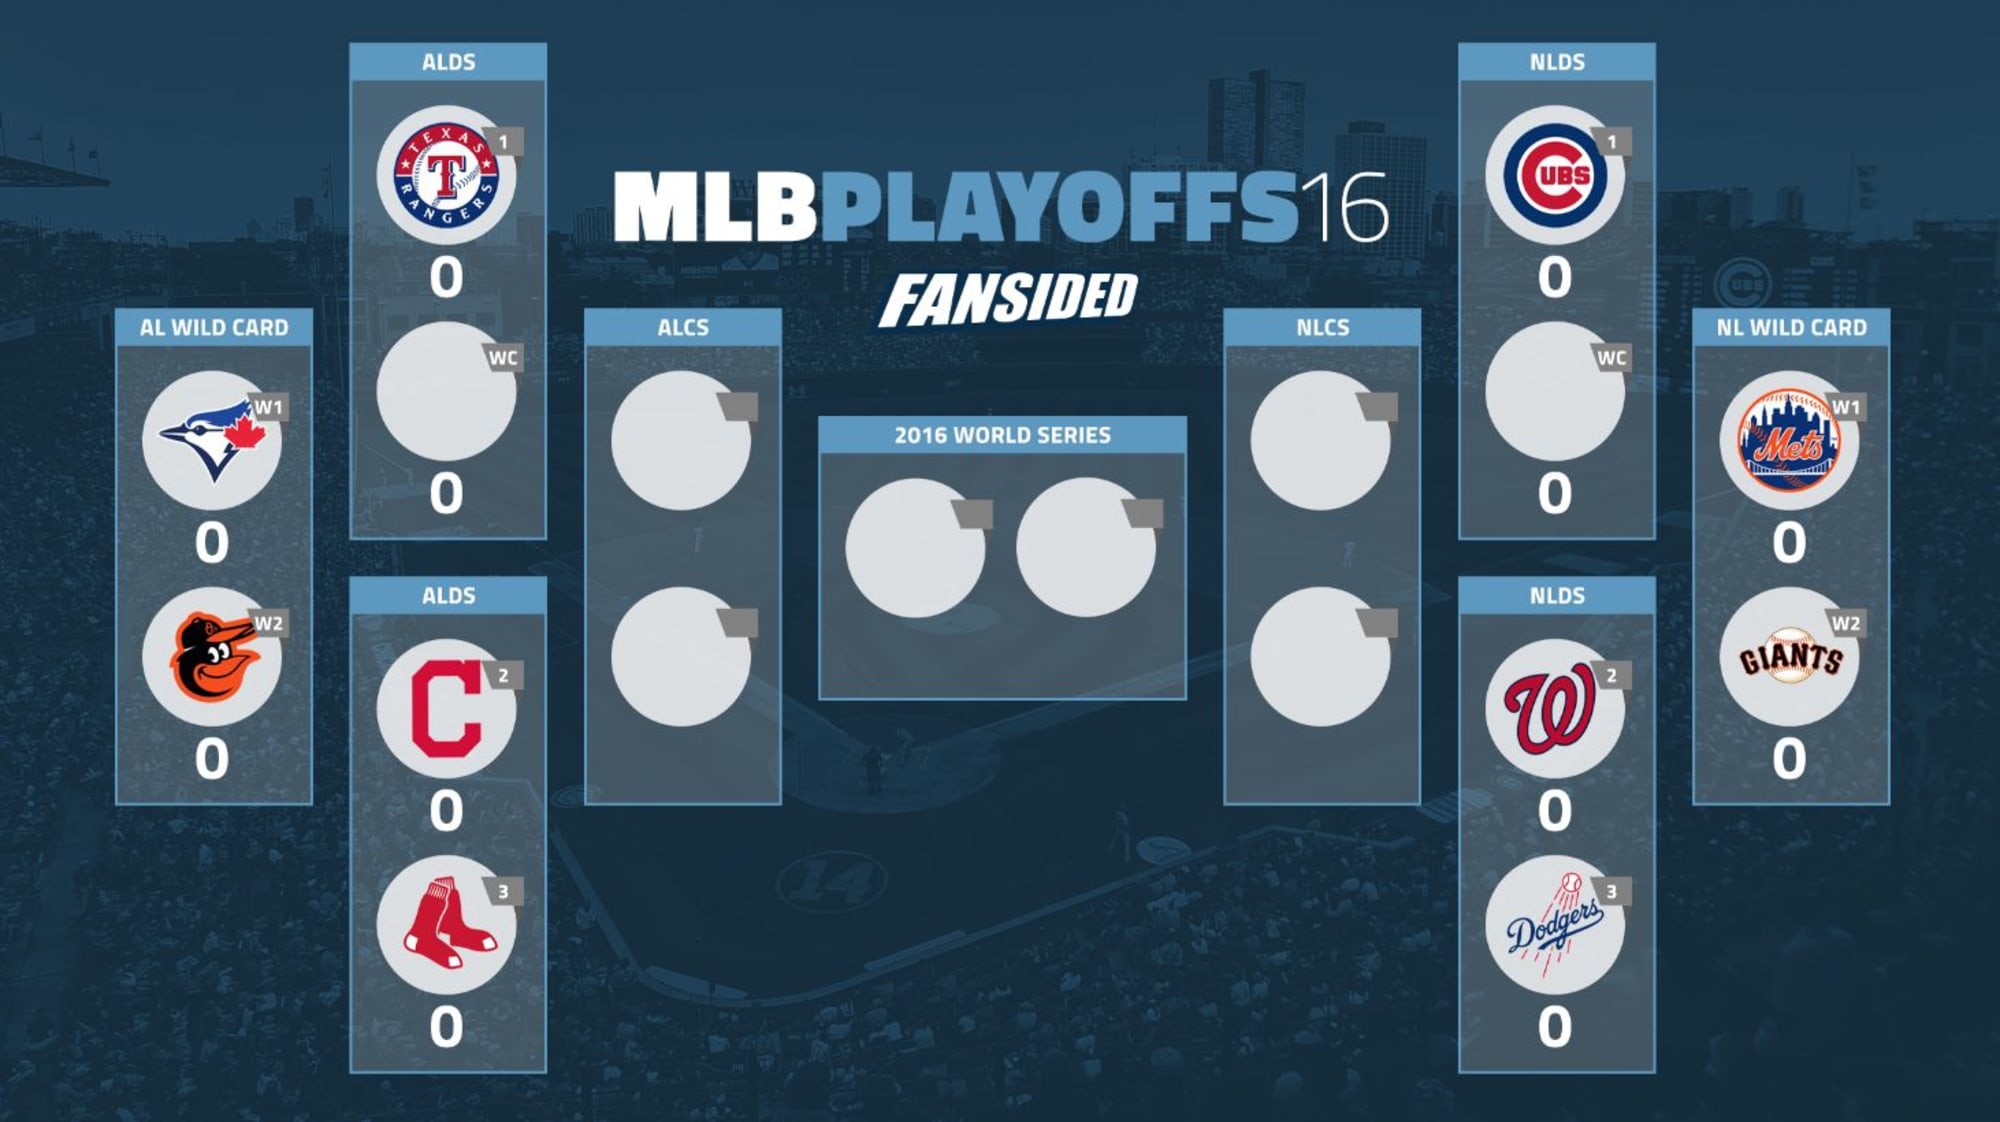  MLB PLAYOFF FUTURES World Series Predictions  Wild Card Game Picks  From Betting Expert  YouTube